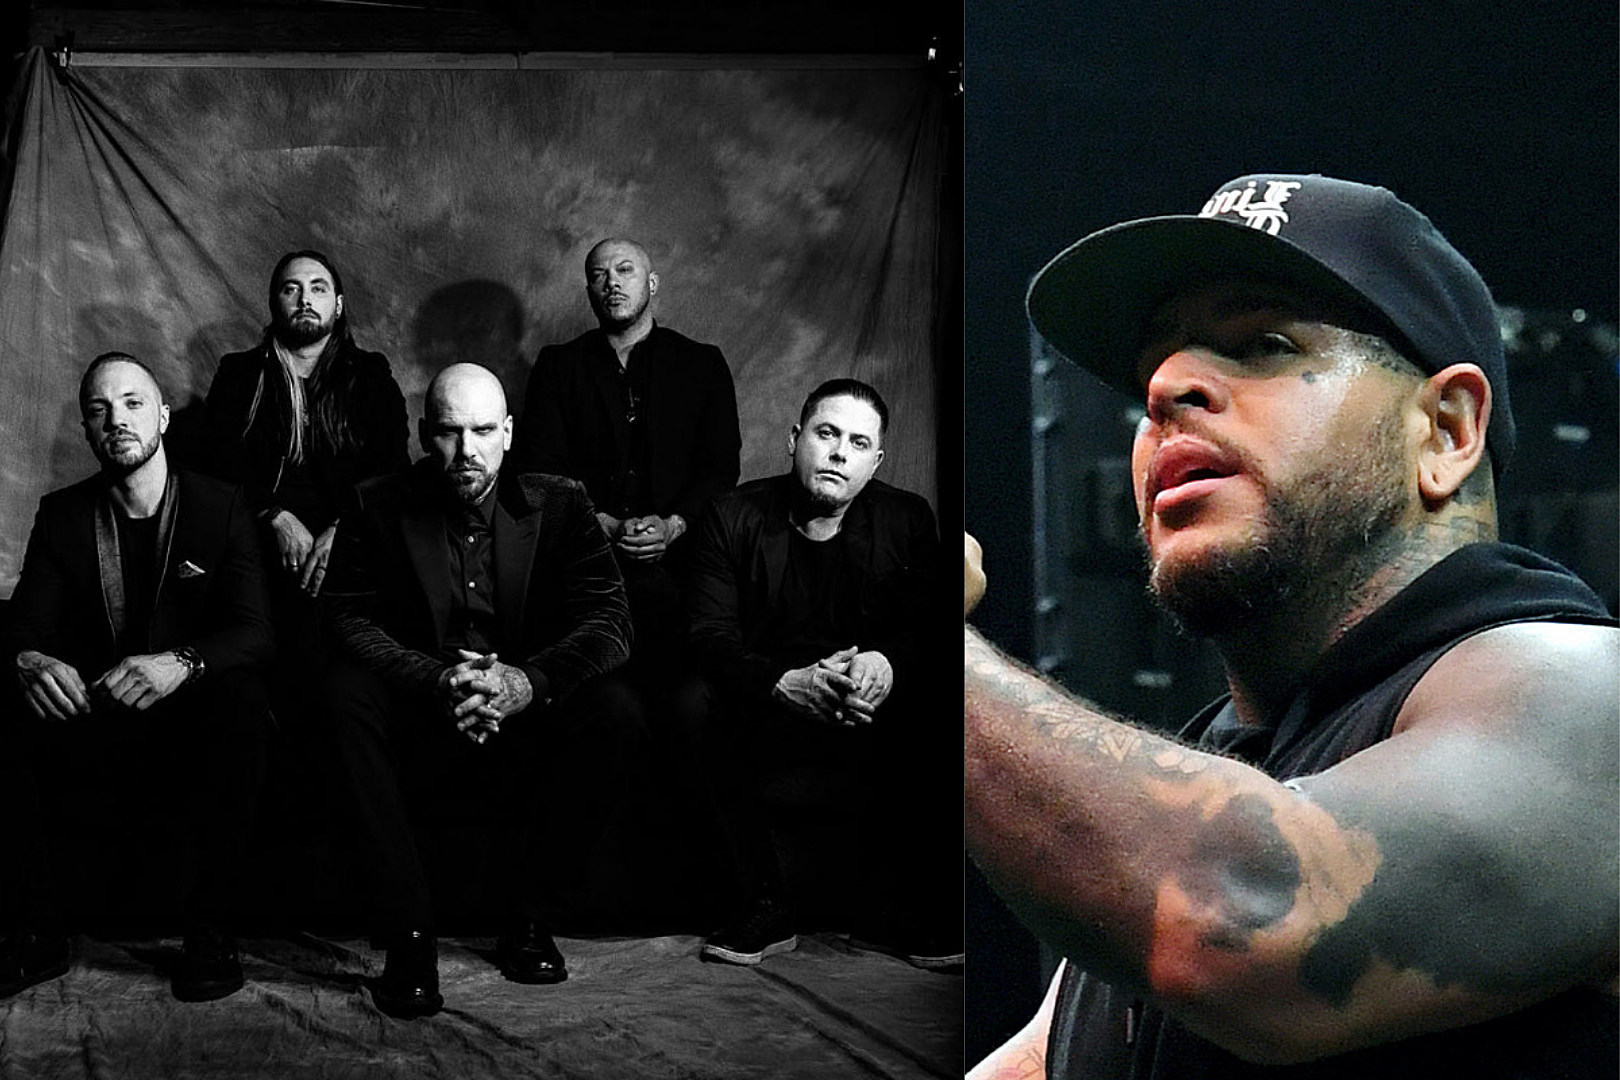 Bad Wolves and Tommy Vext Settle Their Lawsuits With Each Other